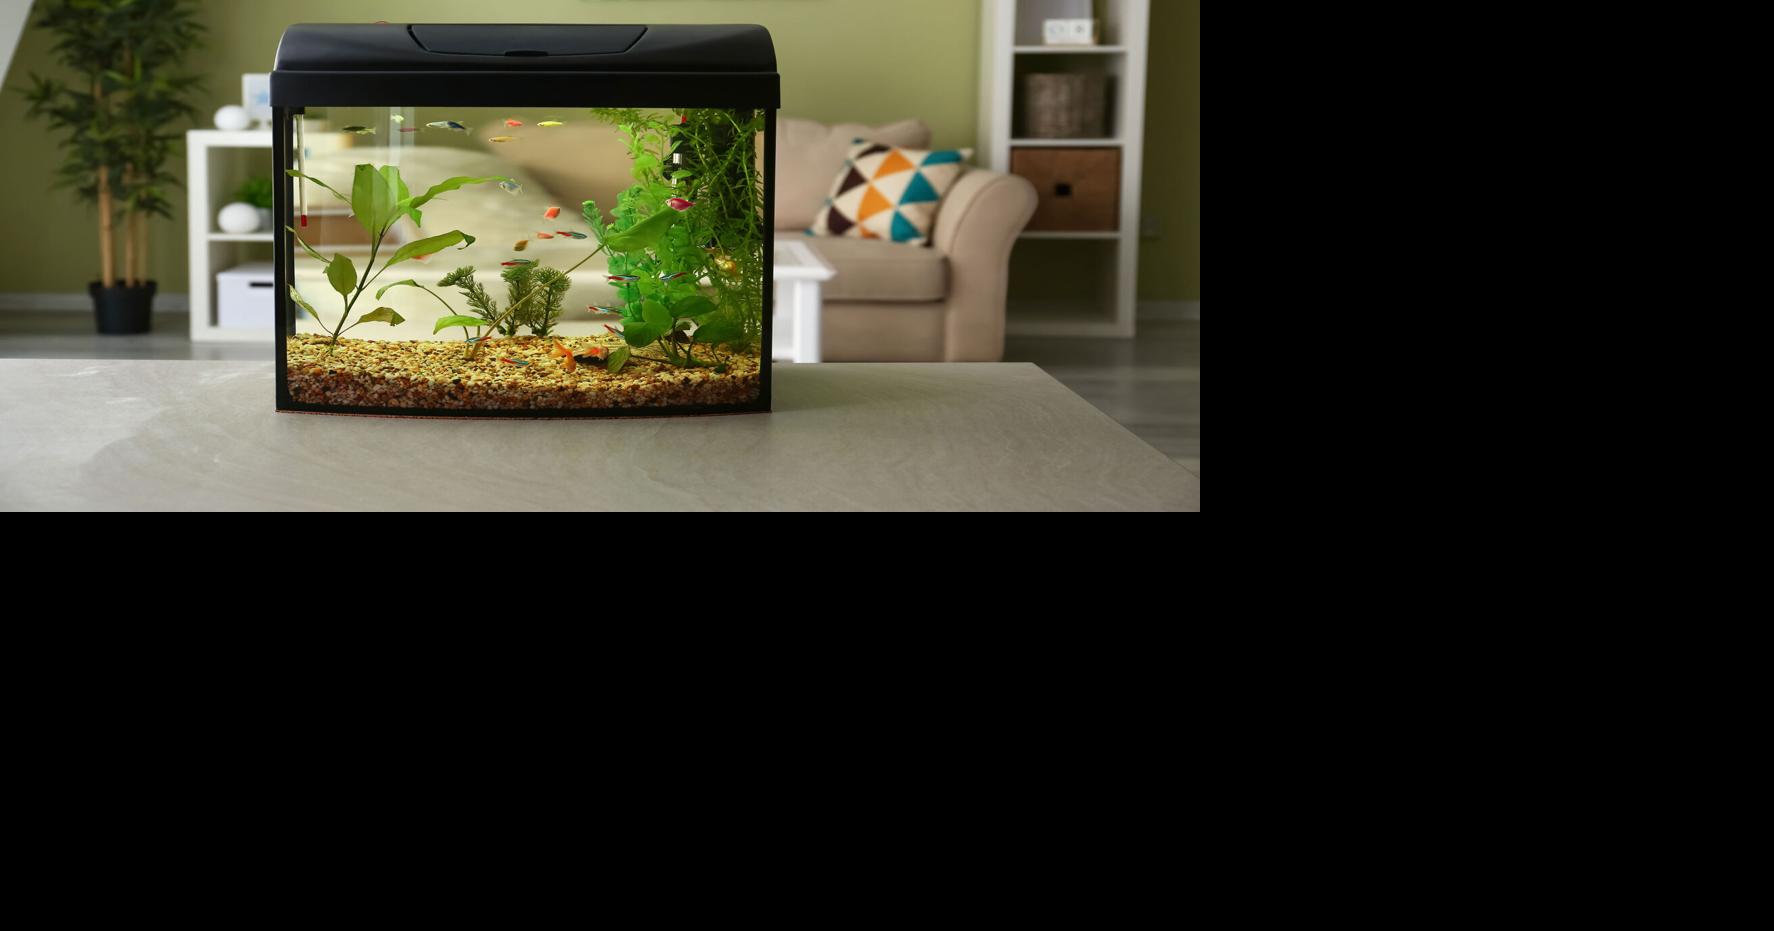 Is Demand for Aquatic Tanks Overwhelming Available Supply?, Trends